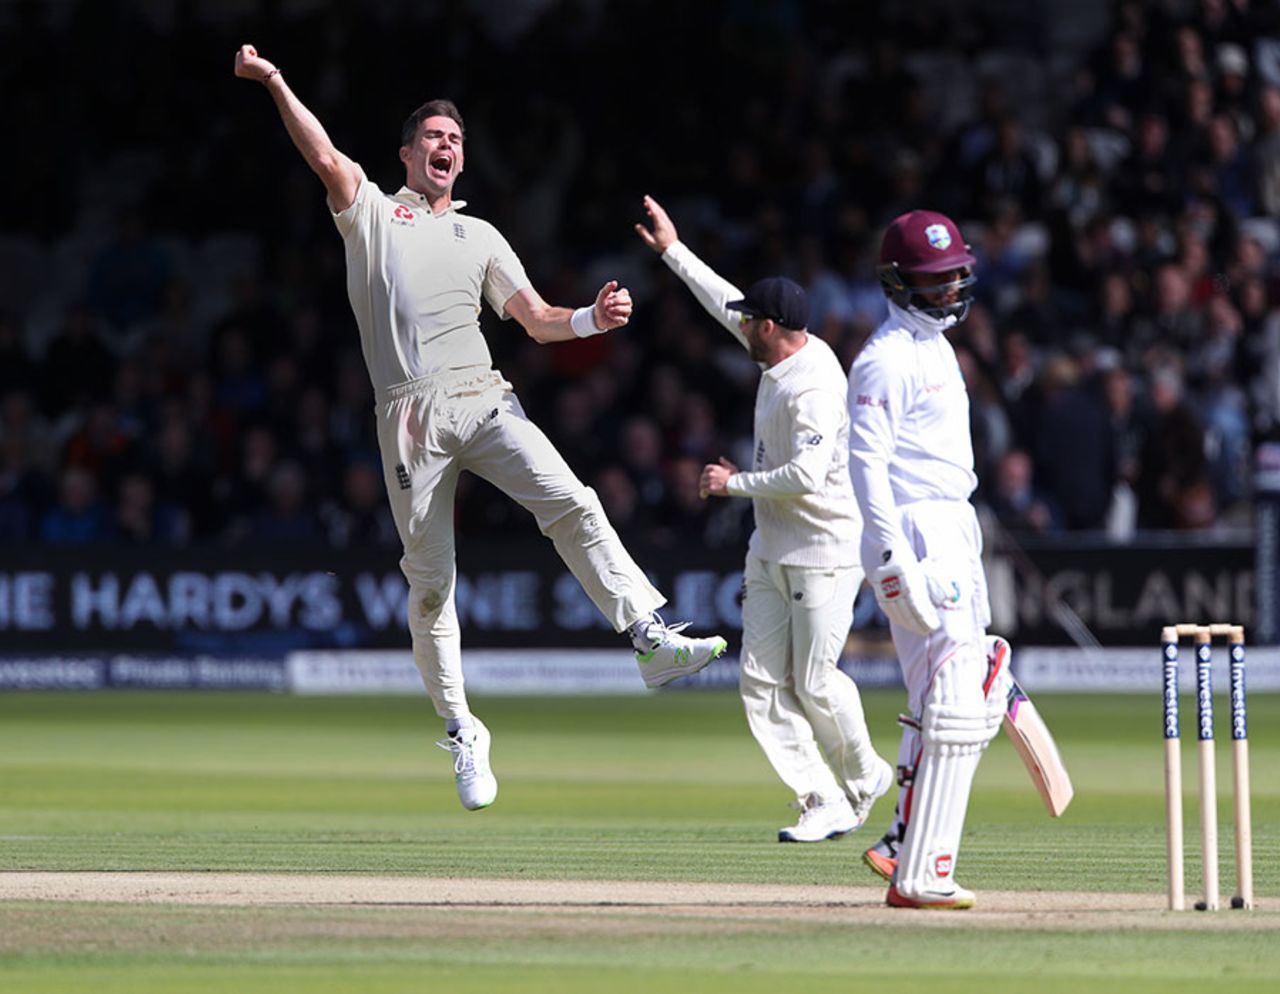 James Anderson removed Shai Hope for his fifth wicket, England v West Indies, 3rd Investec Test, Lord's, 3rd day, September 9, 2017 